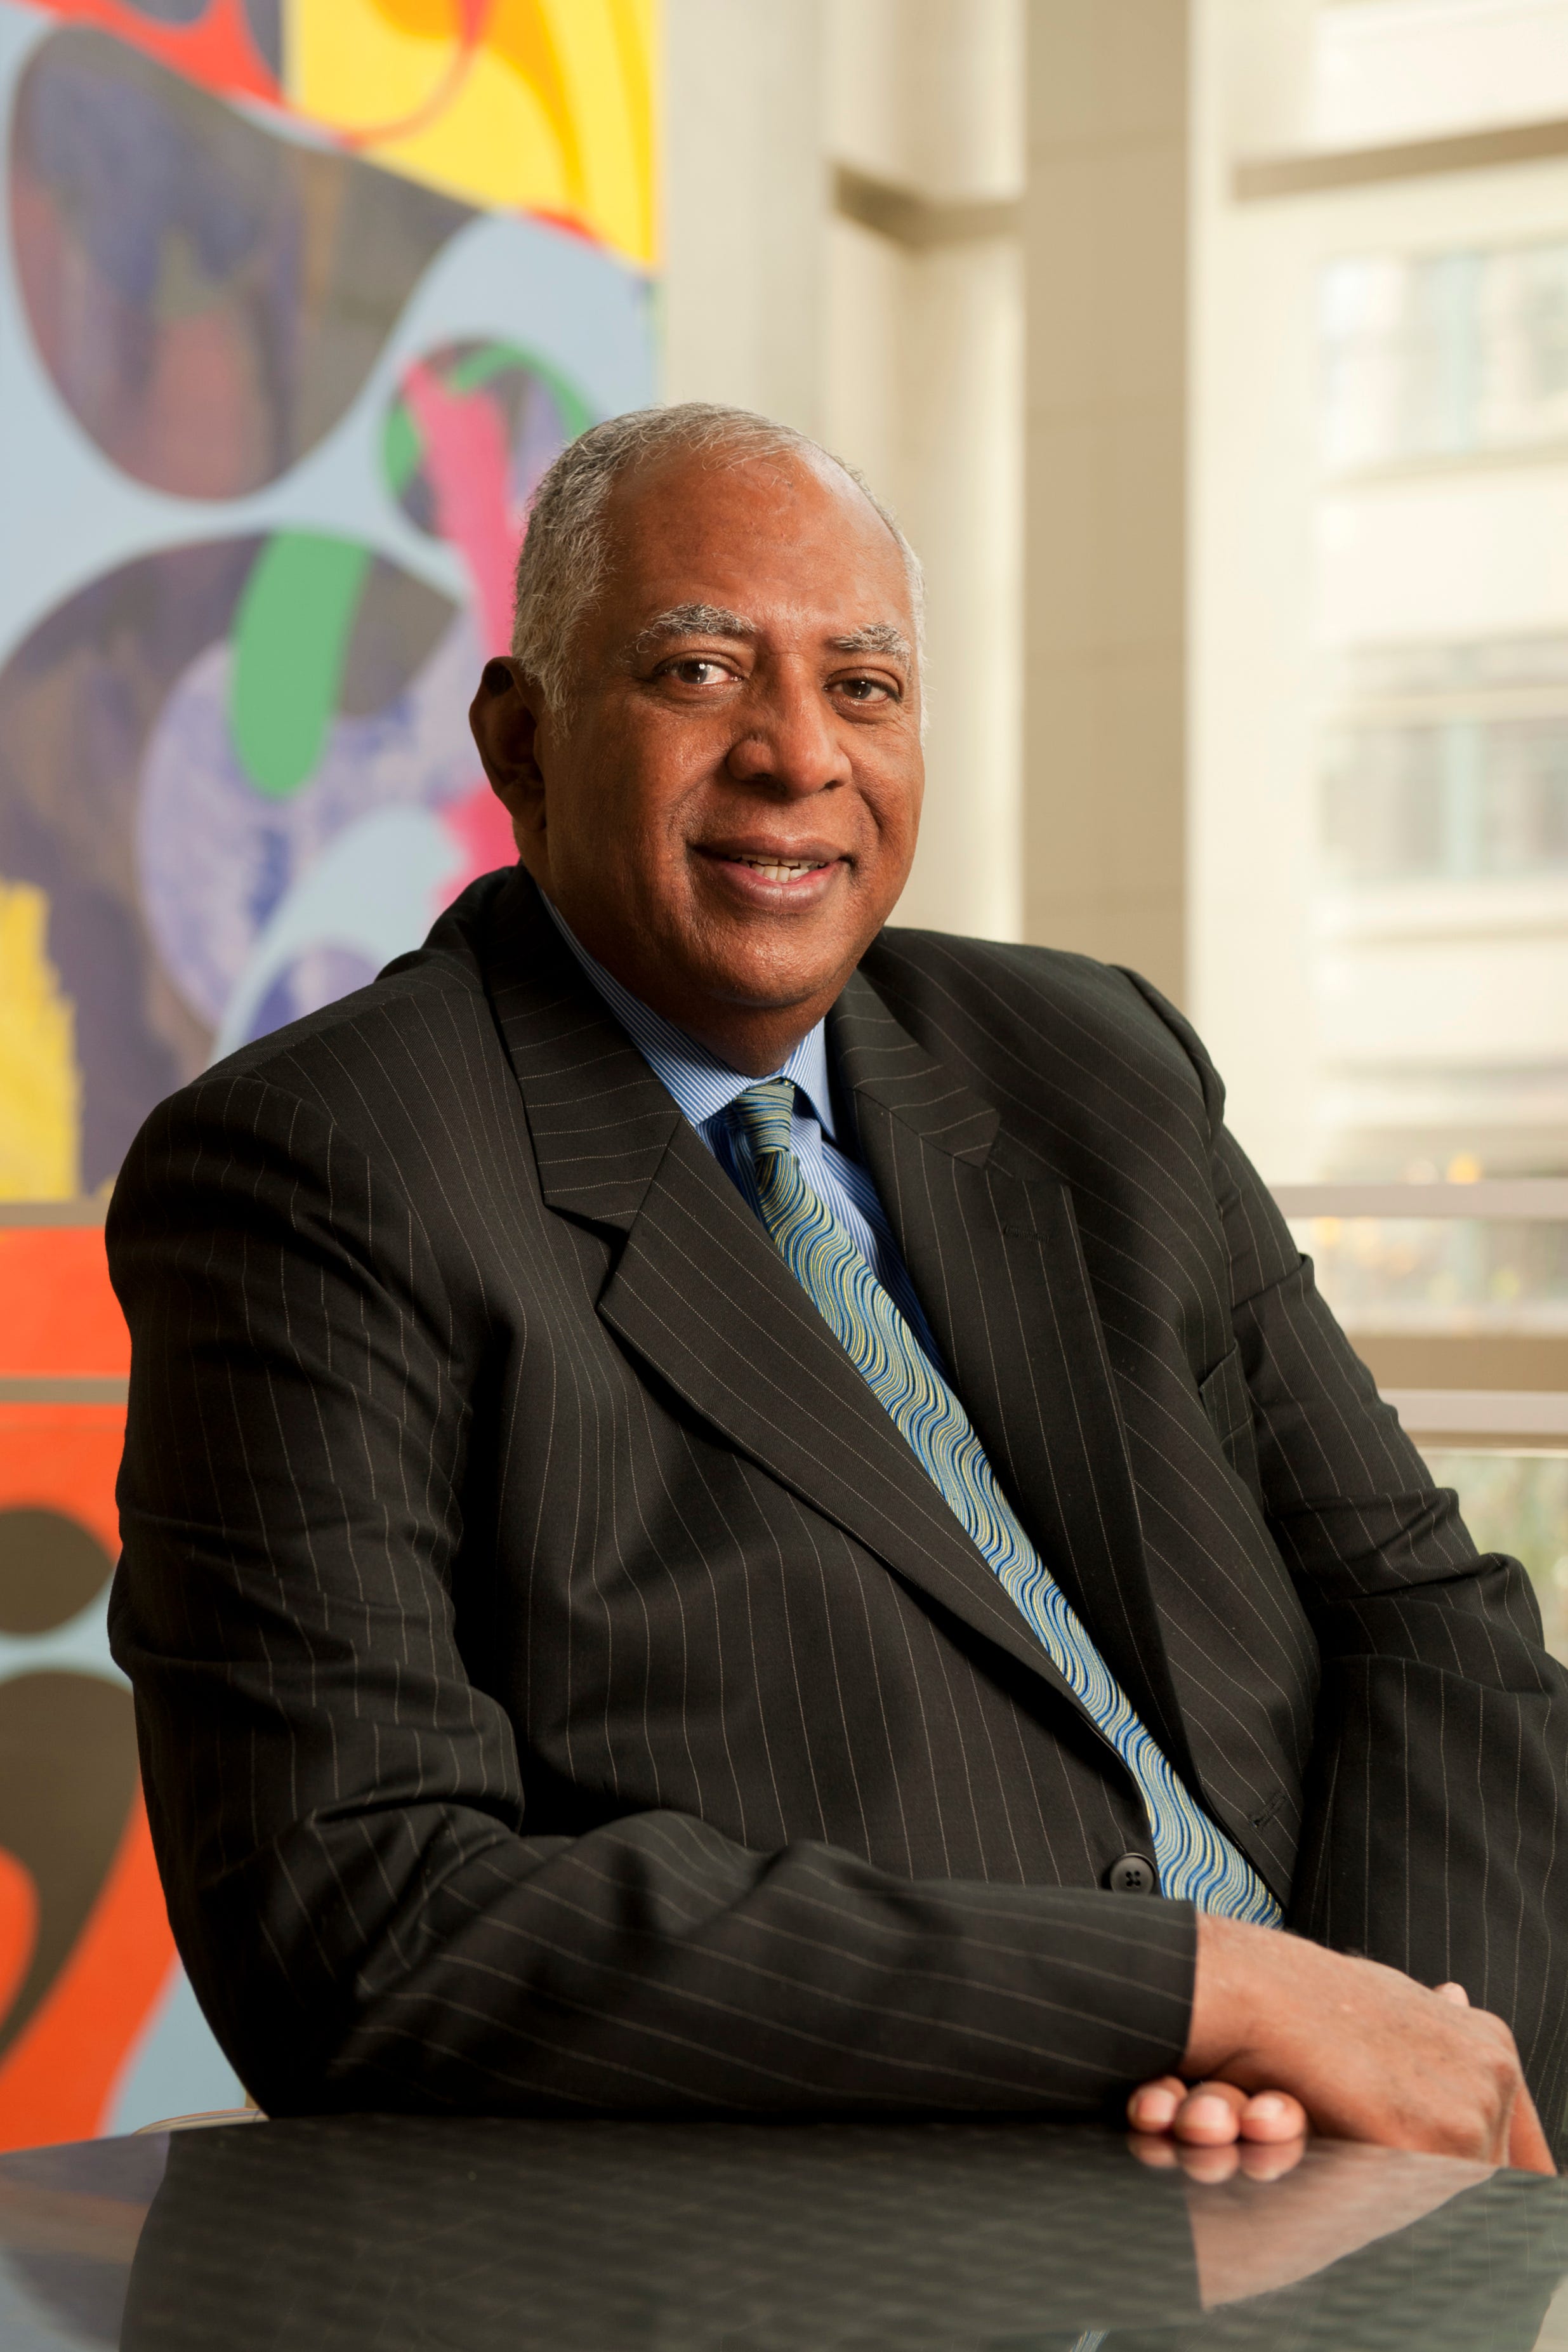 “There is no issue, zero issue, with the candidate pool,” says Barry Lawson Williams, a retired Black businessman who has served on more than a dozen public company boards.